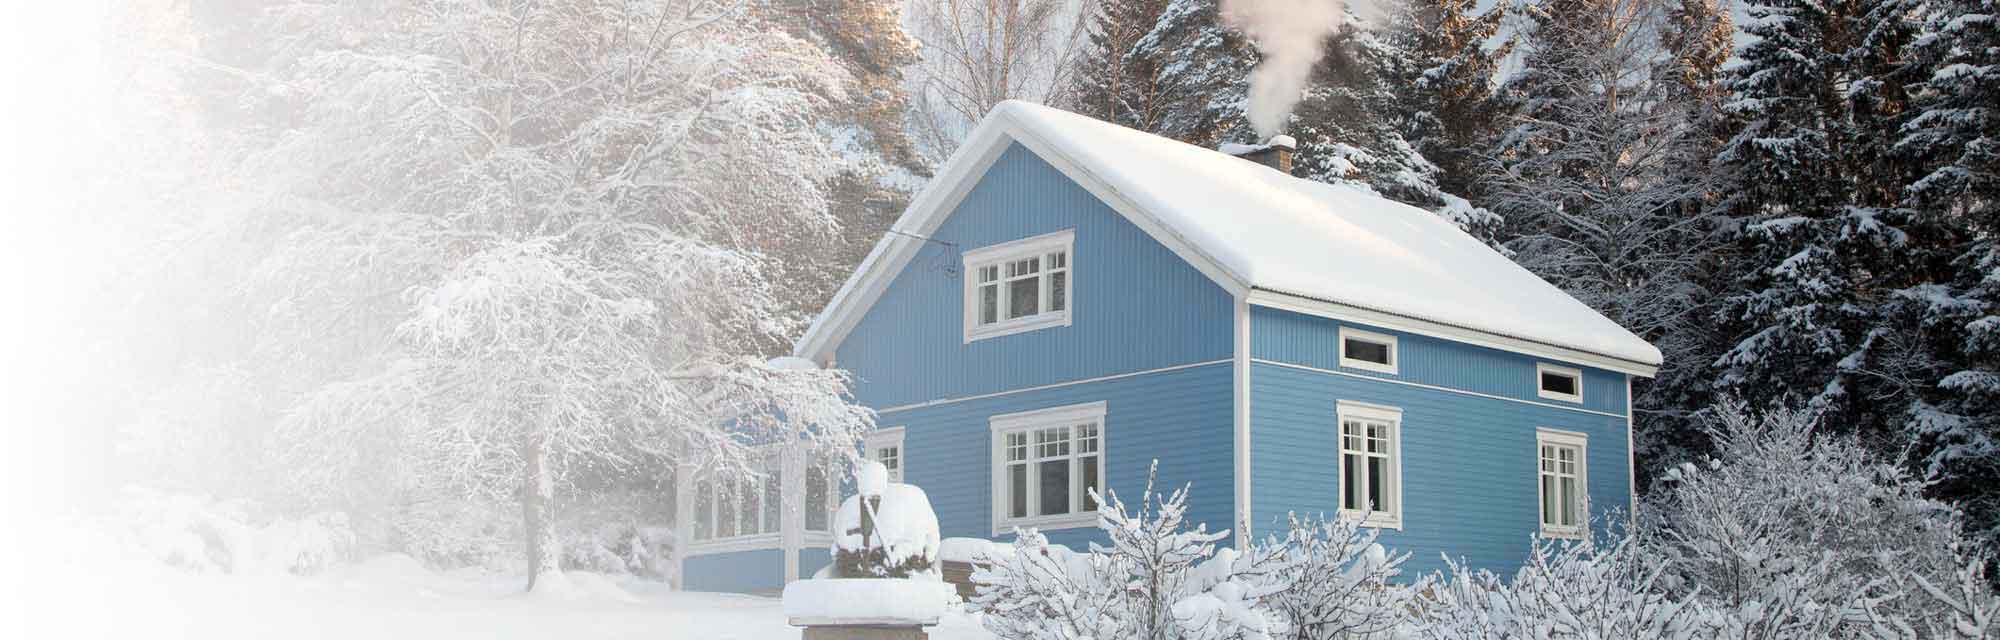 blue house in a snowy area with many trees